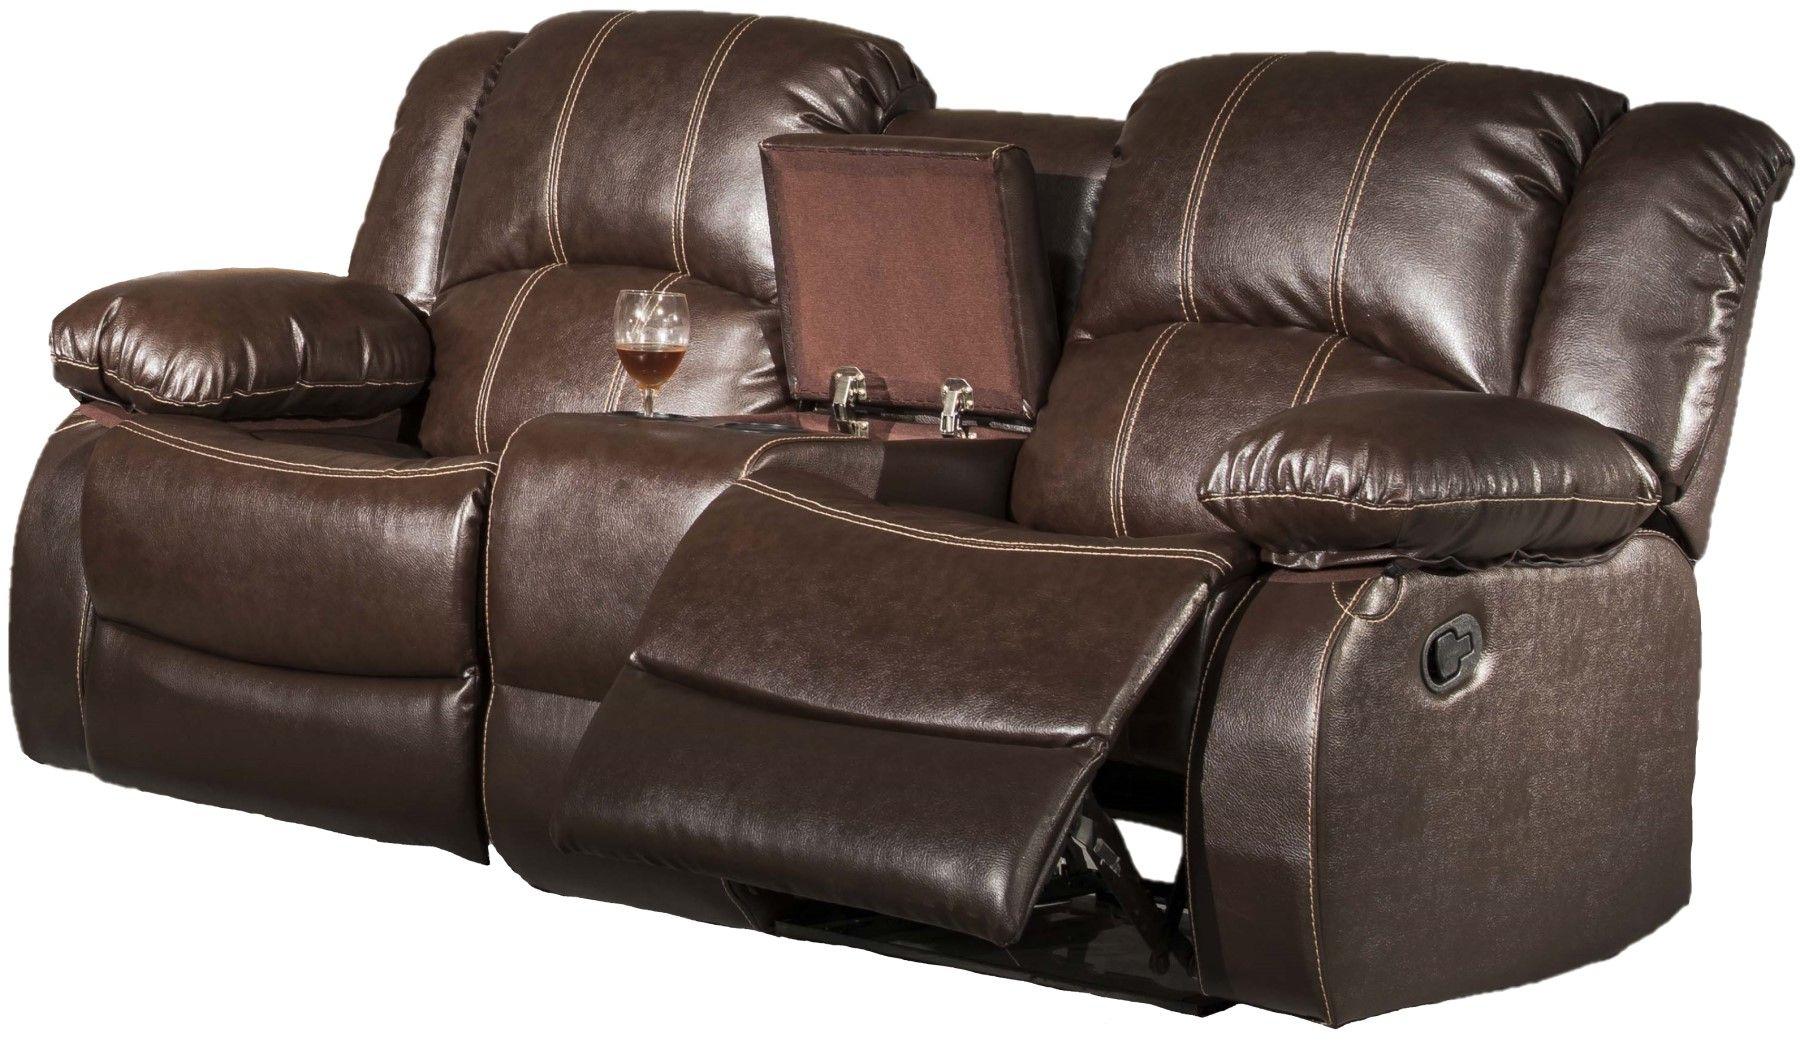 

    
SF3592 SECTIONAL Brown Faux Leather Reclining Motion Sectional Sofa w/ Storage Console McFerran SF3592
